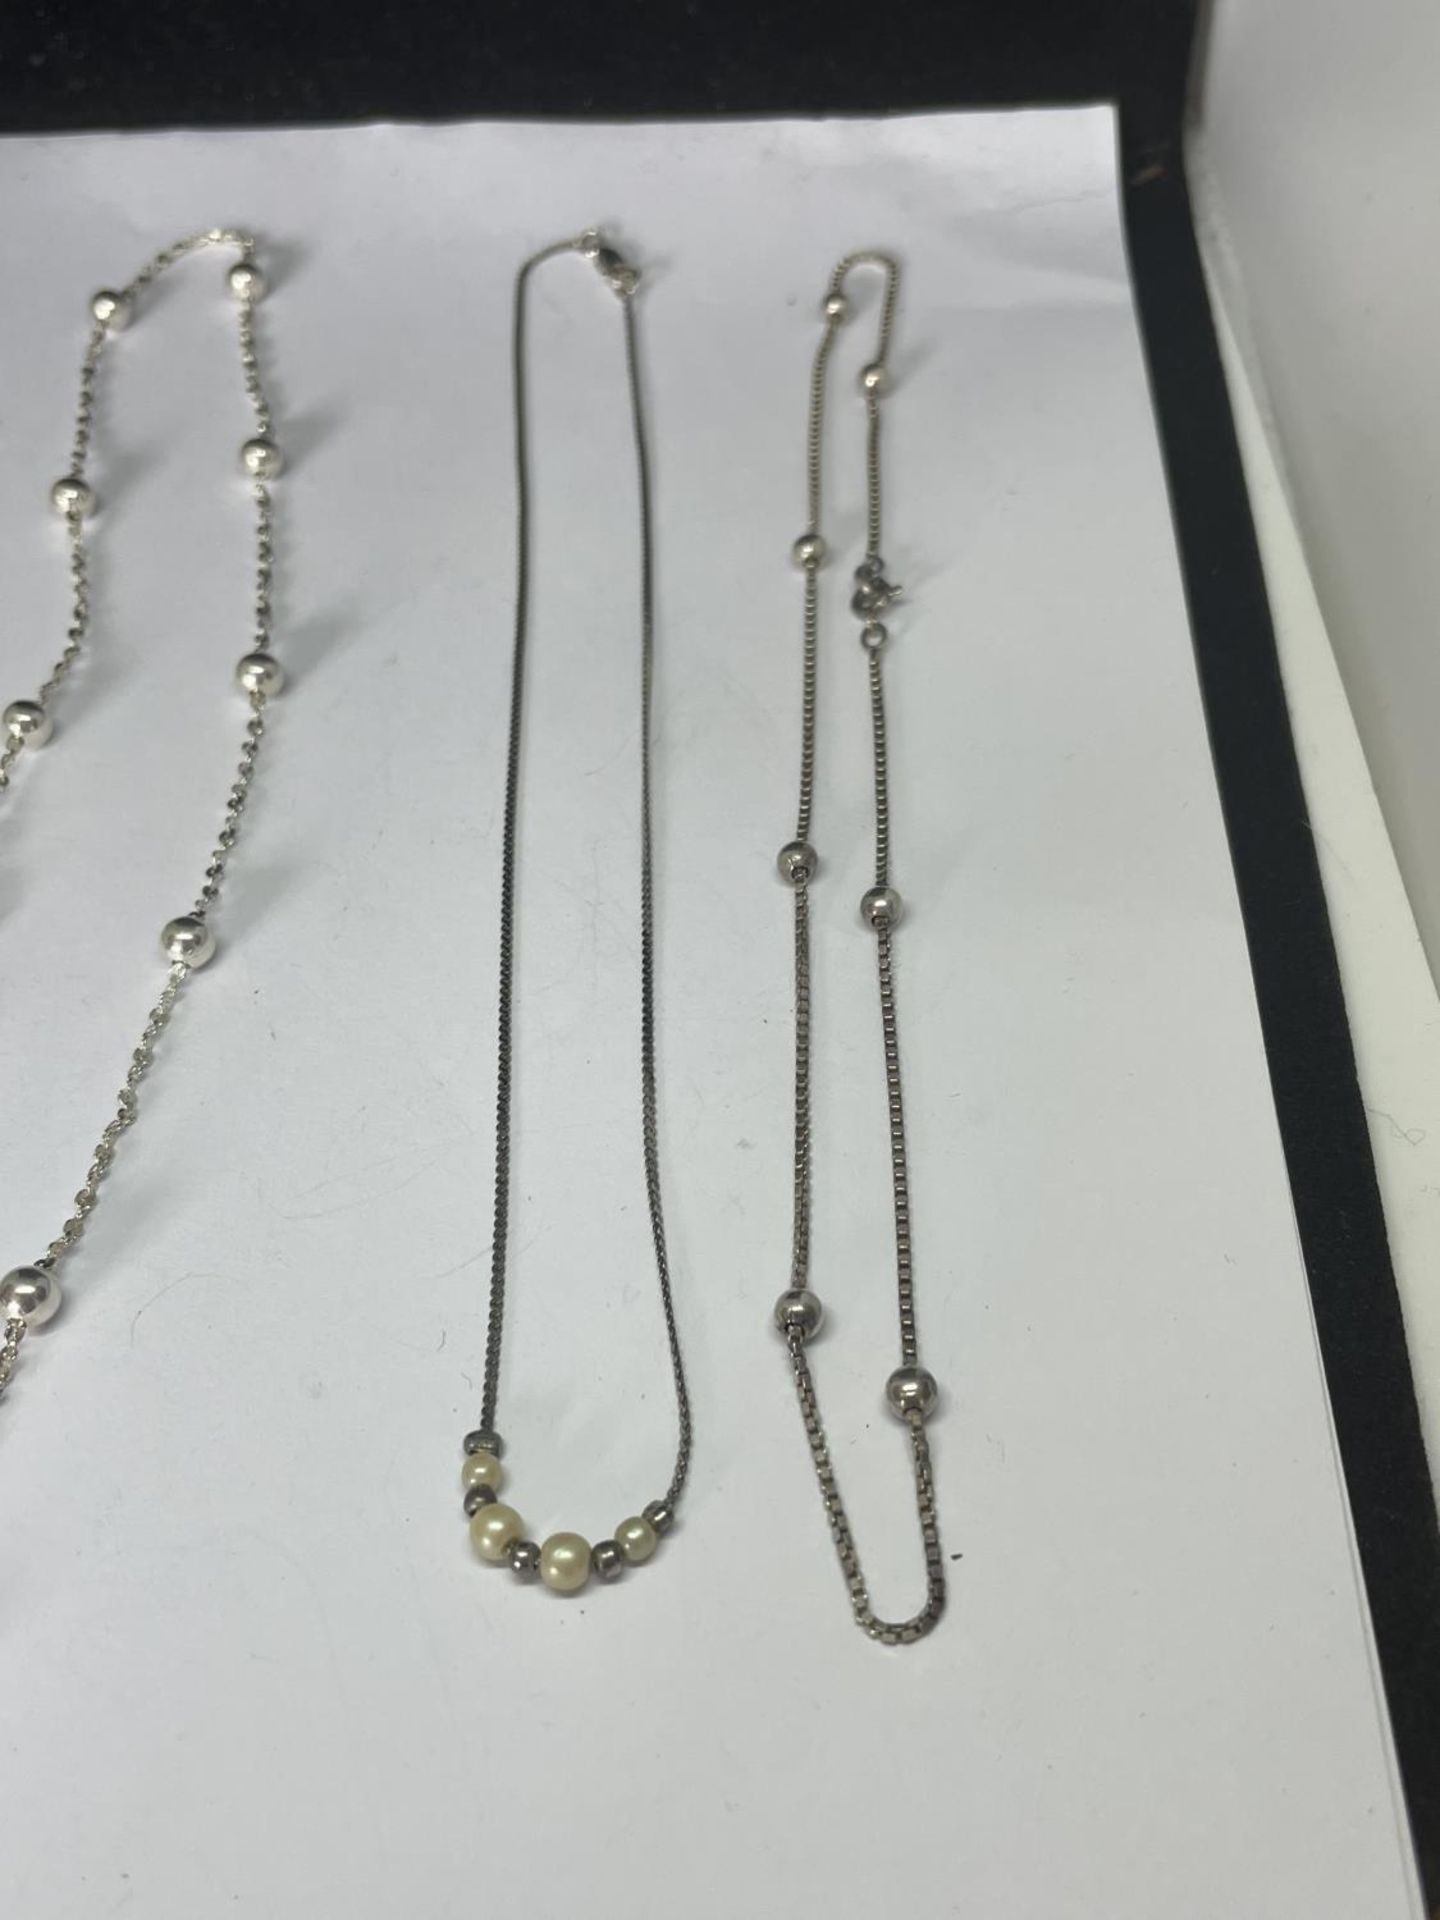 FOUR SILVER NECKLACES WITH BALL DESIGN - Image 3 of 5